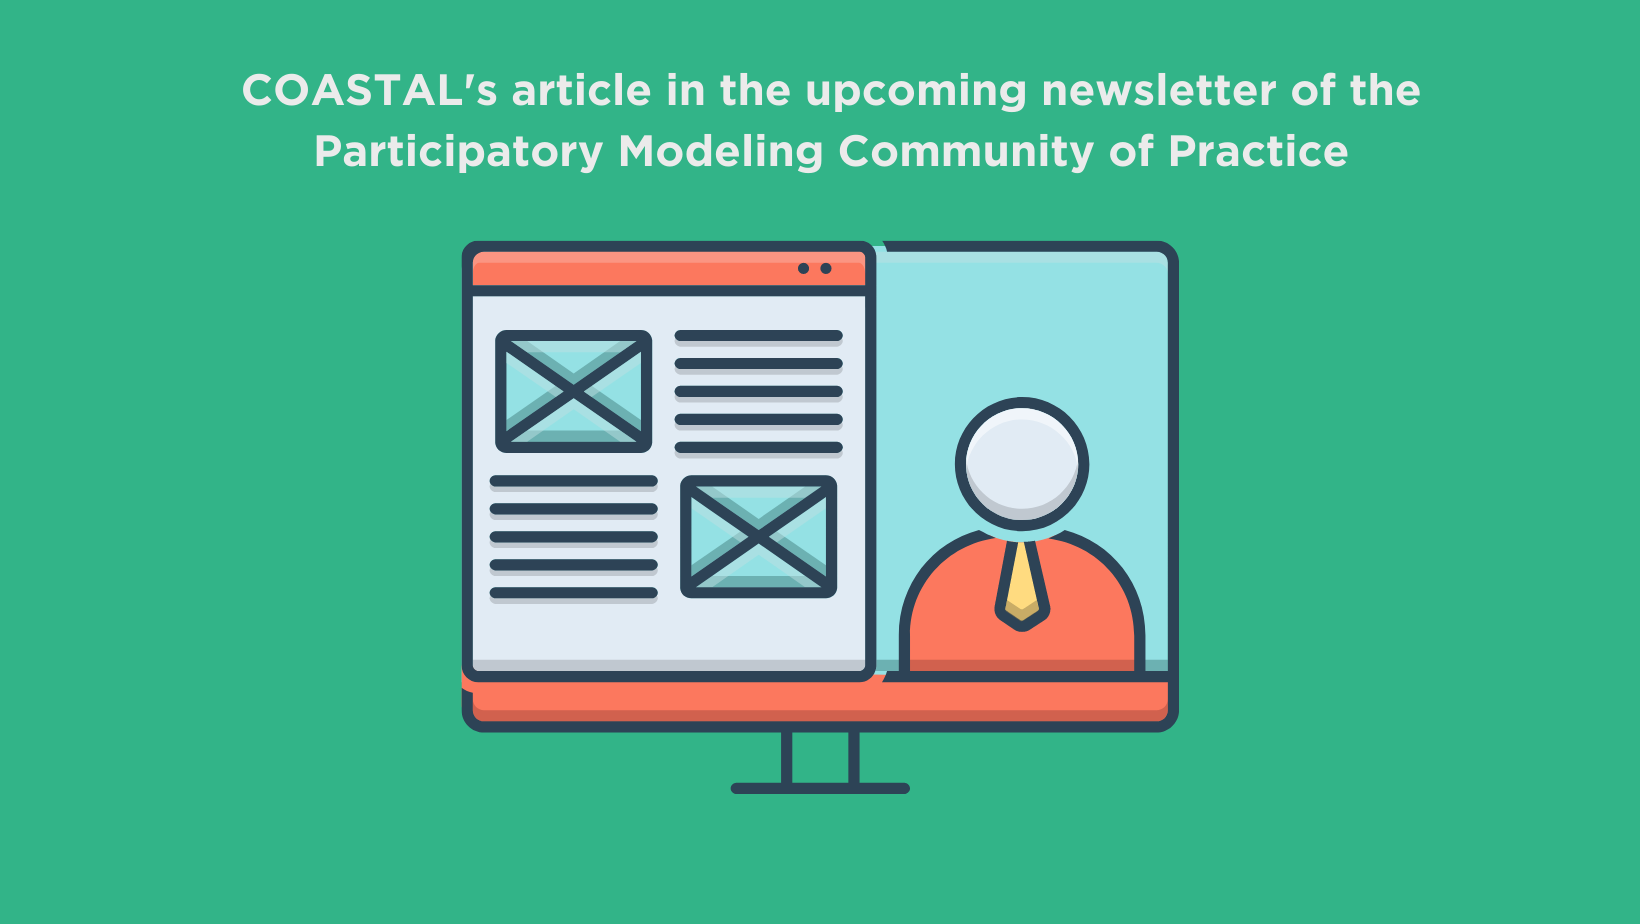 COASTAL contribution for a coming newsletter of the Participatory Modeling Community of Practice